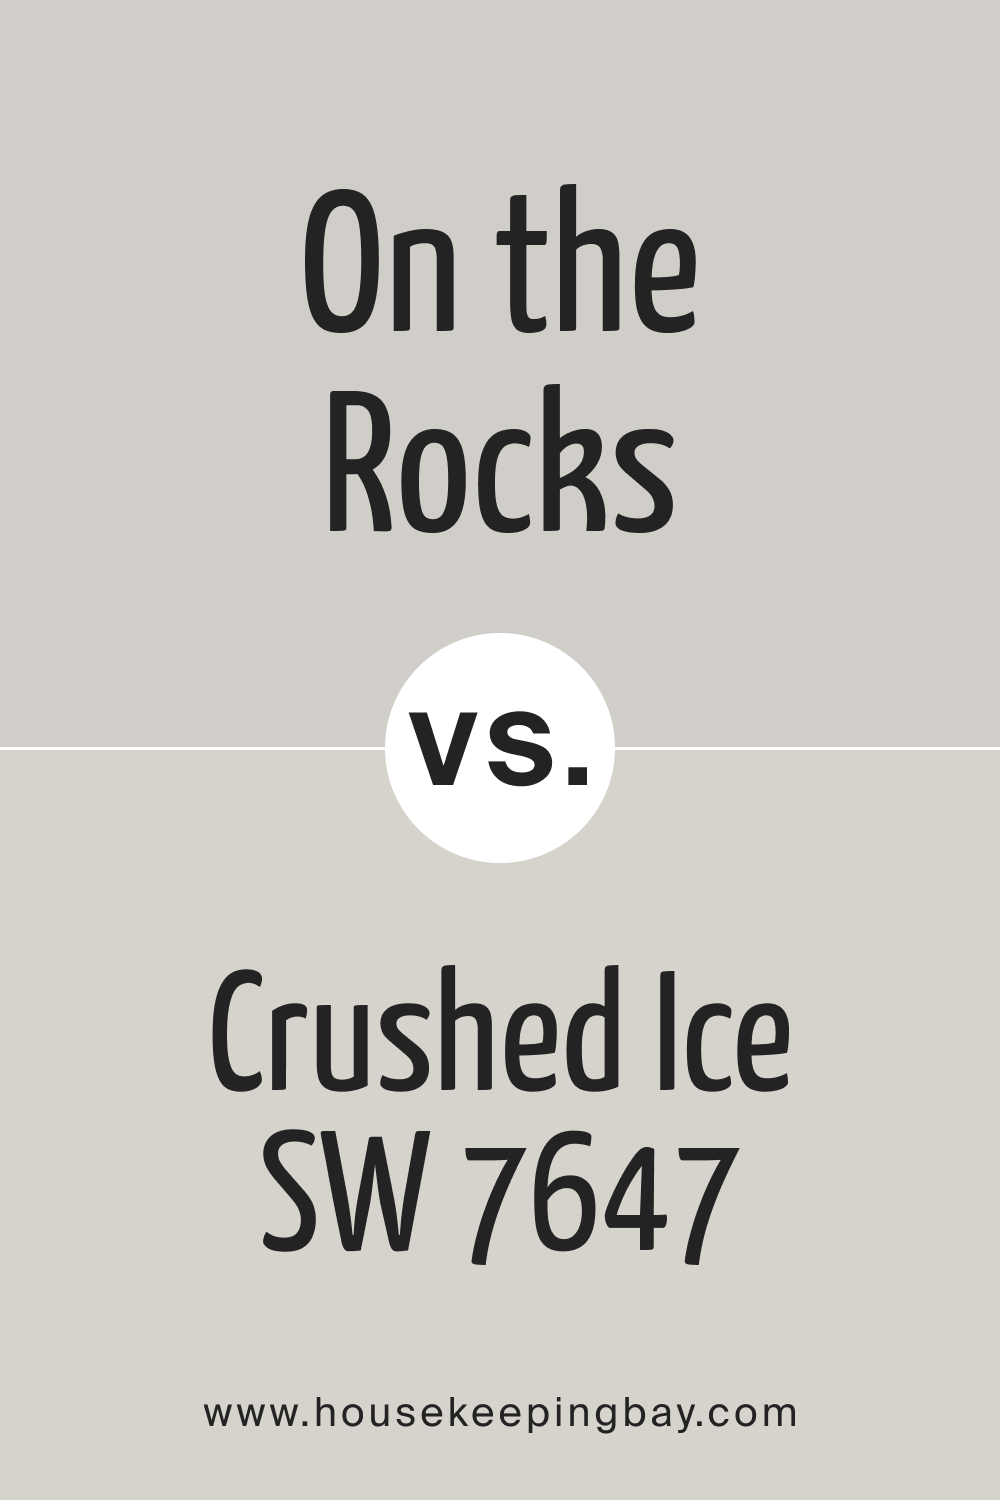 On the Rocks SW 7671 vs Crushed Ice SW 7647